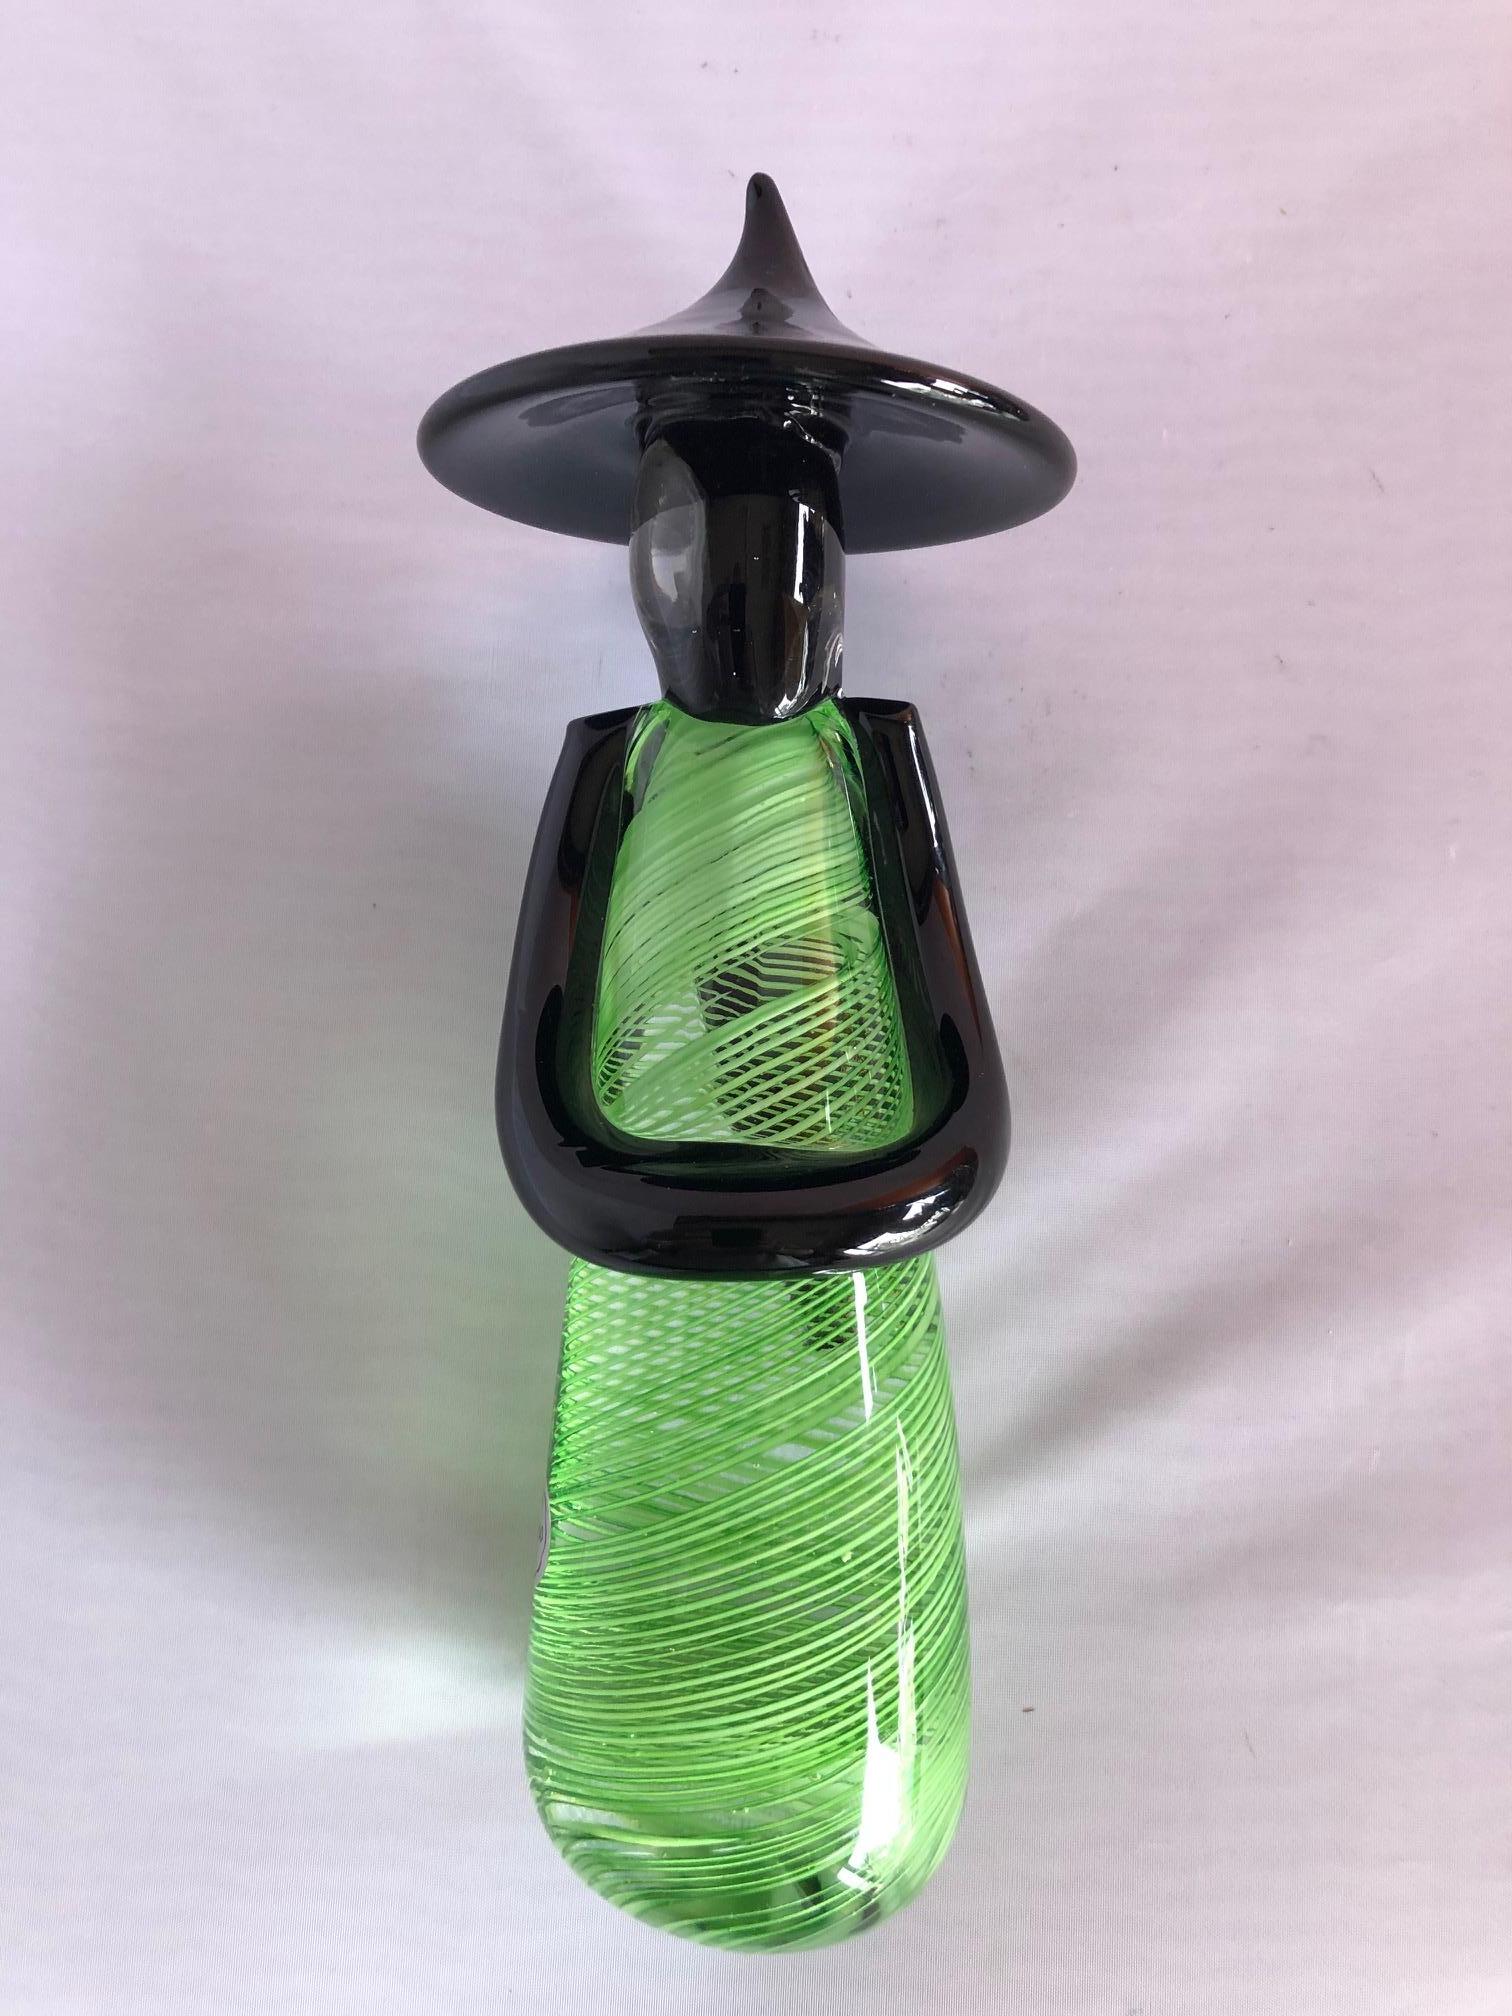 Gorgeous art glass Chinese figurine in green swirl, black and clear Murano glass, circa 1970s. The pieces is signed 